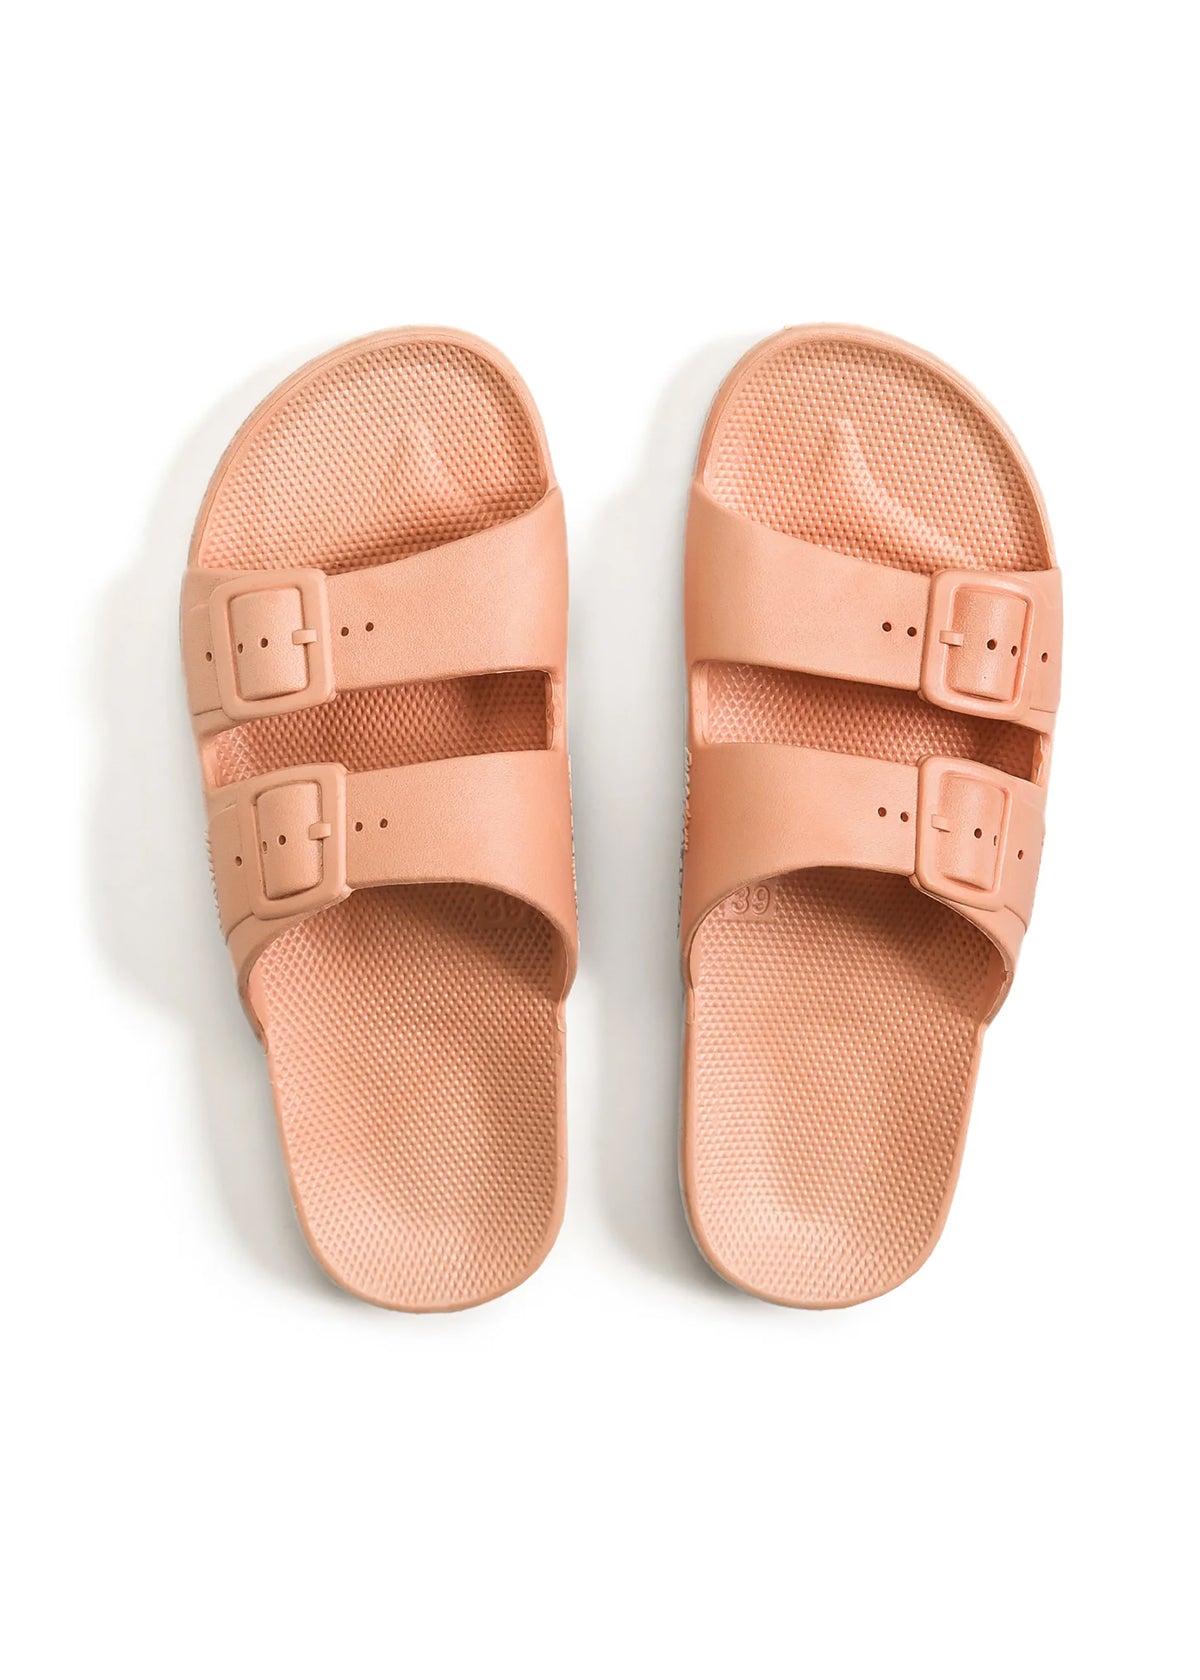 Freedom Moses sandals - cuttings with two straps, Apricot